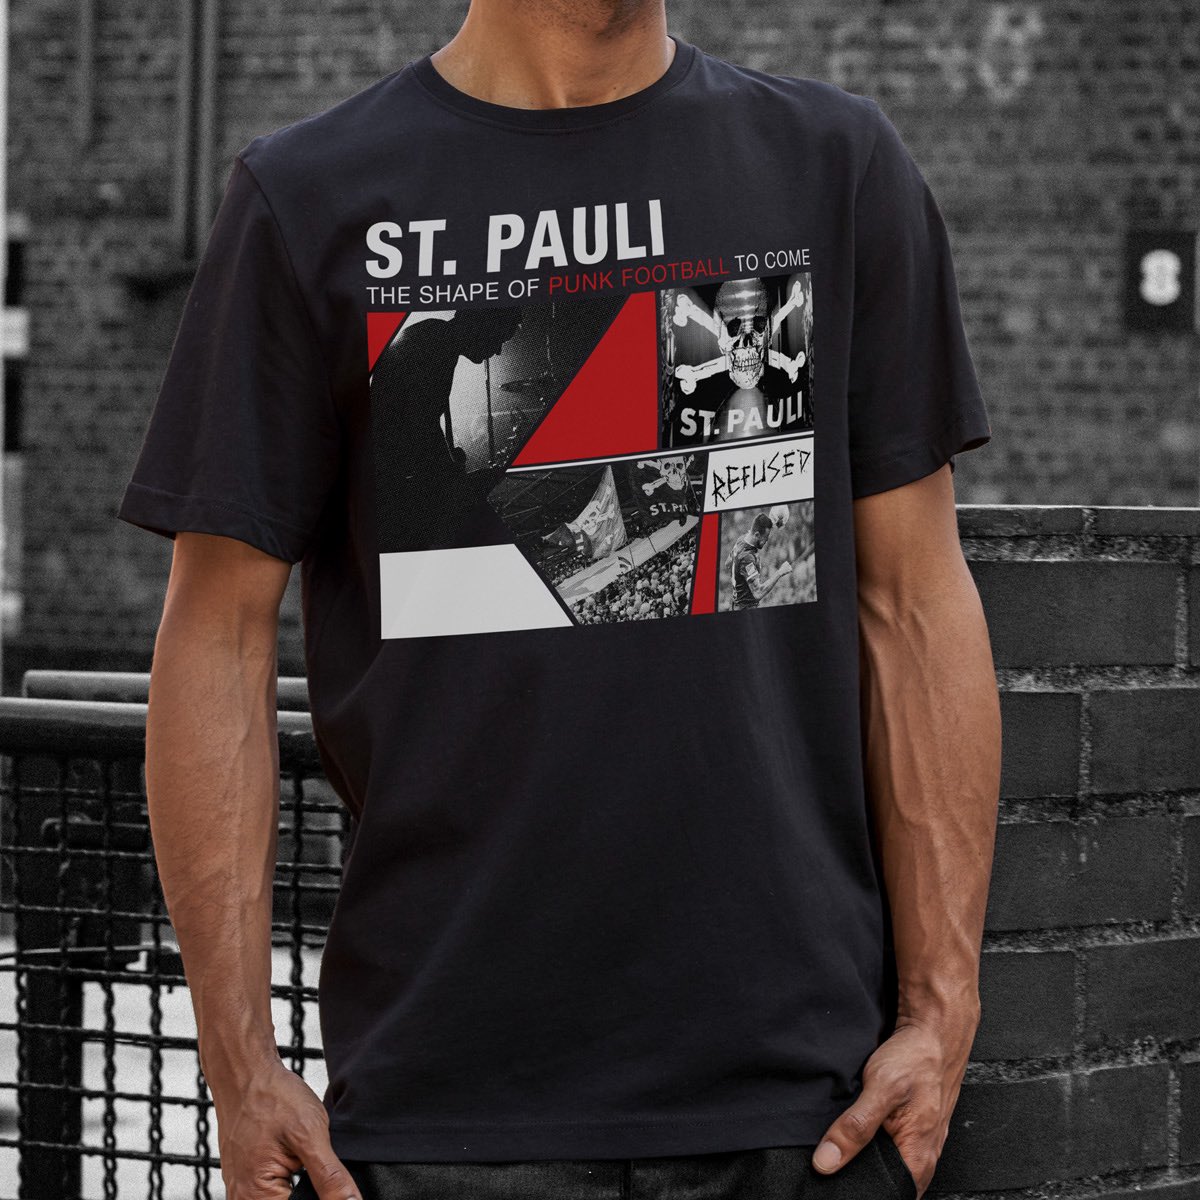 REFUSED on Twitter: "Excited to unveil this colab with our friends at FC St Pauli in Germany. Allowing us to the bands passion for with a club that share many